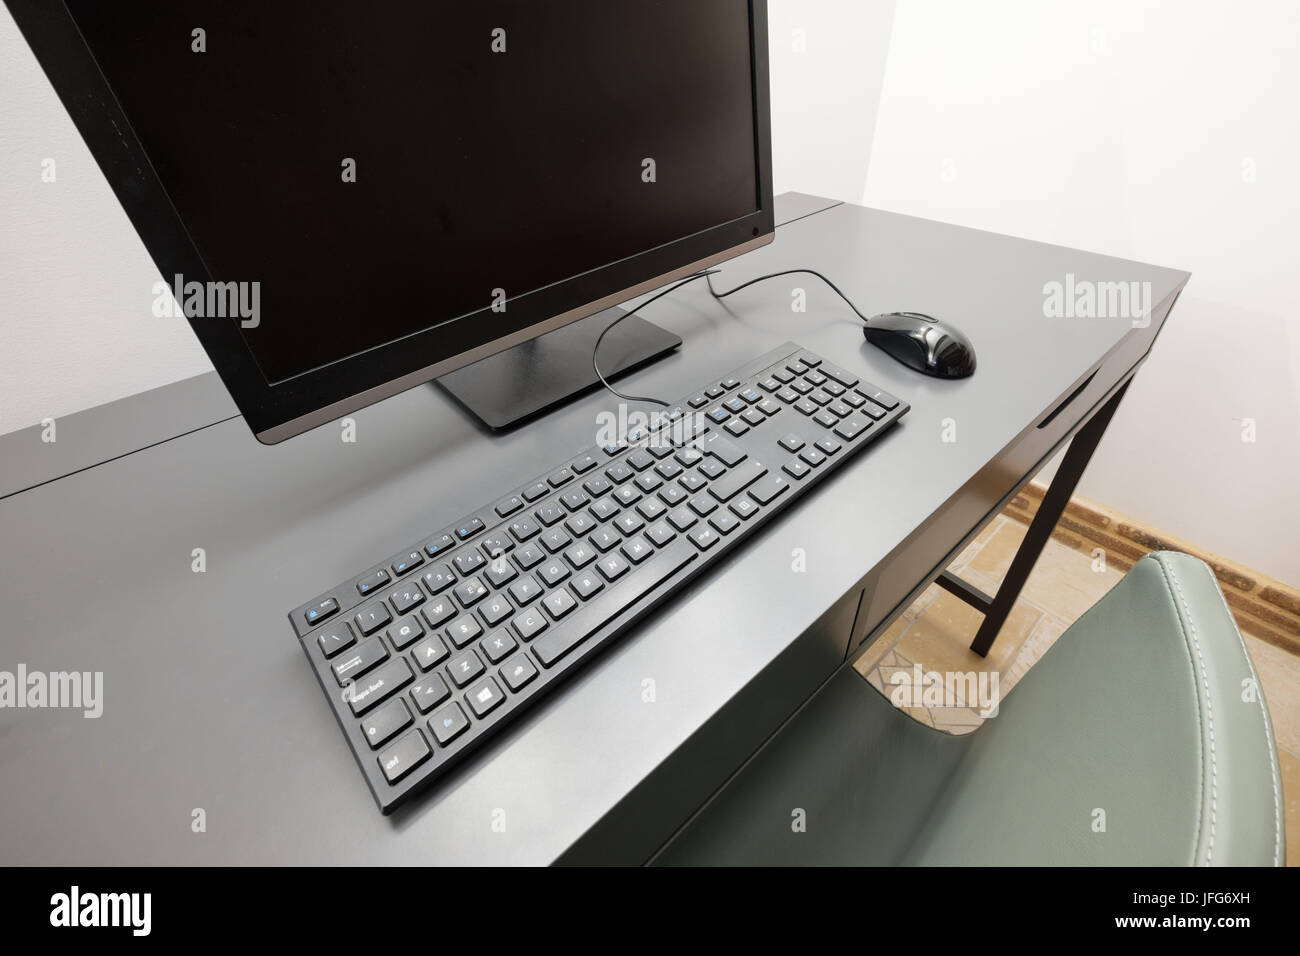 Desktop computer with monitor, keyboard and wired mouse on a desk Stock Photo